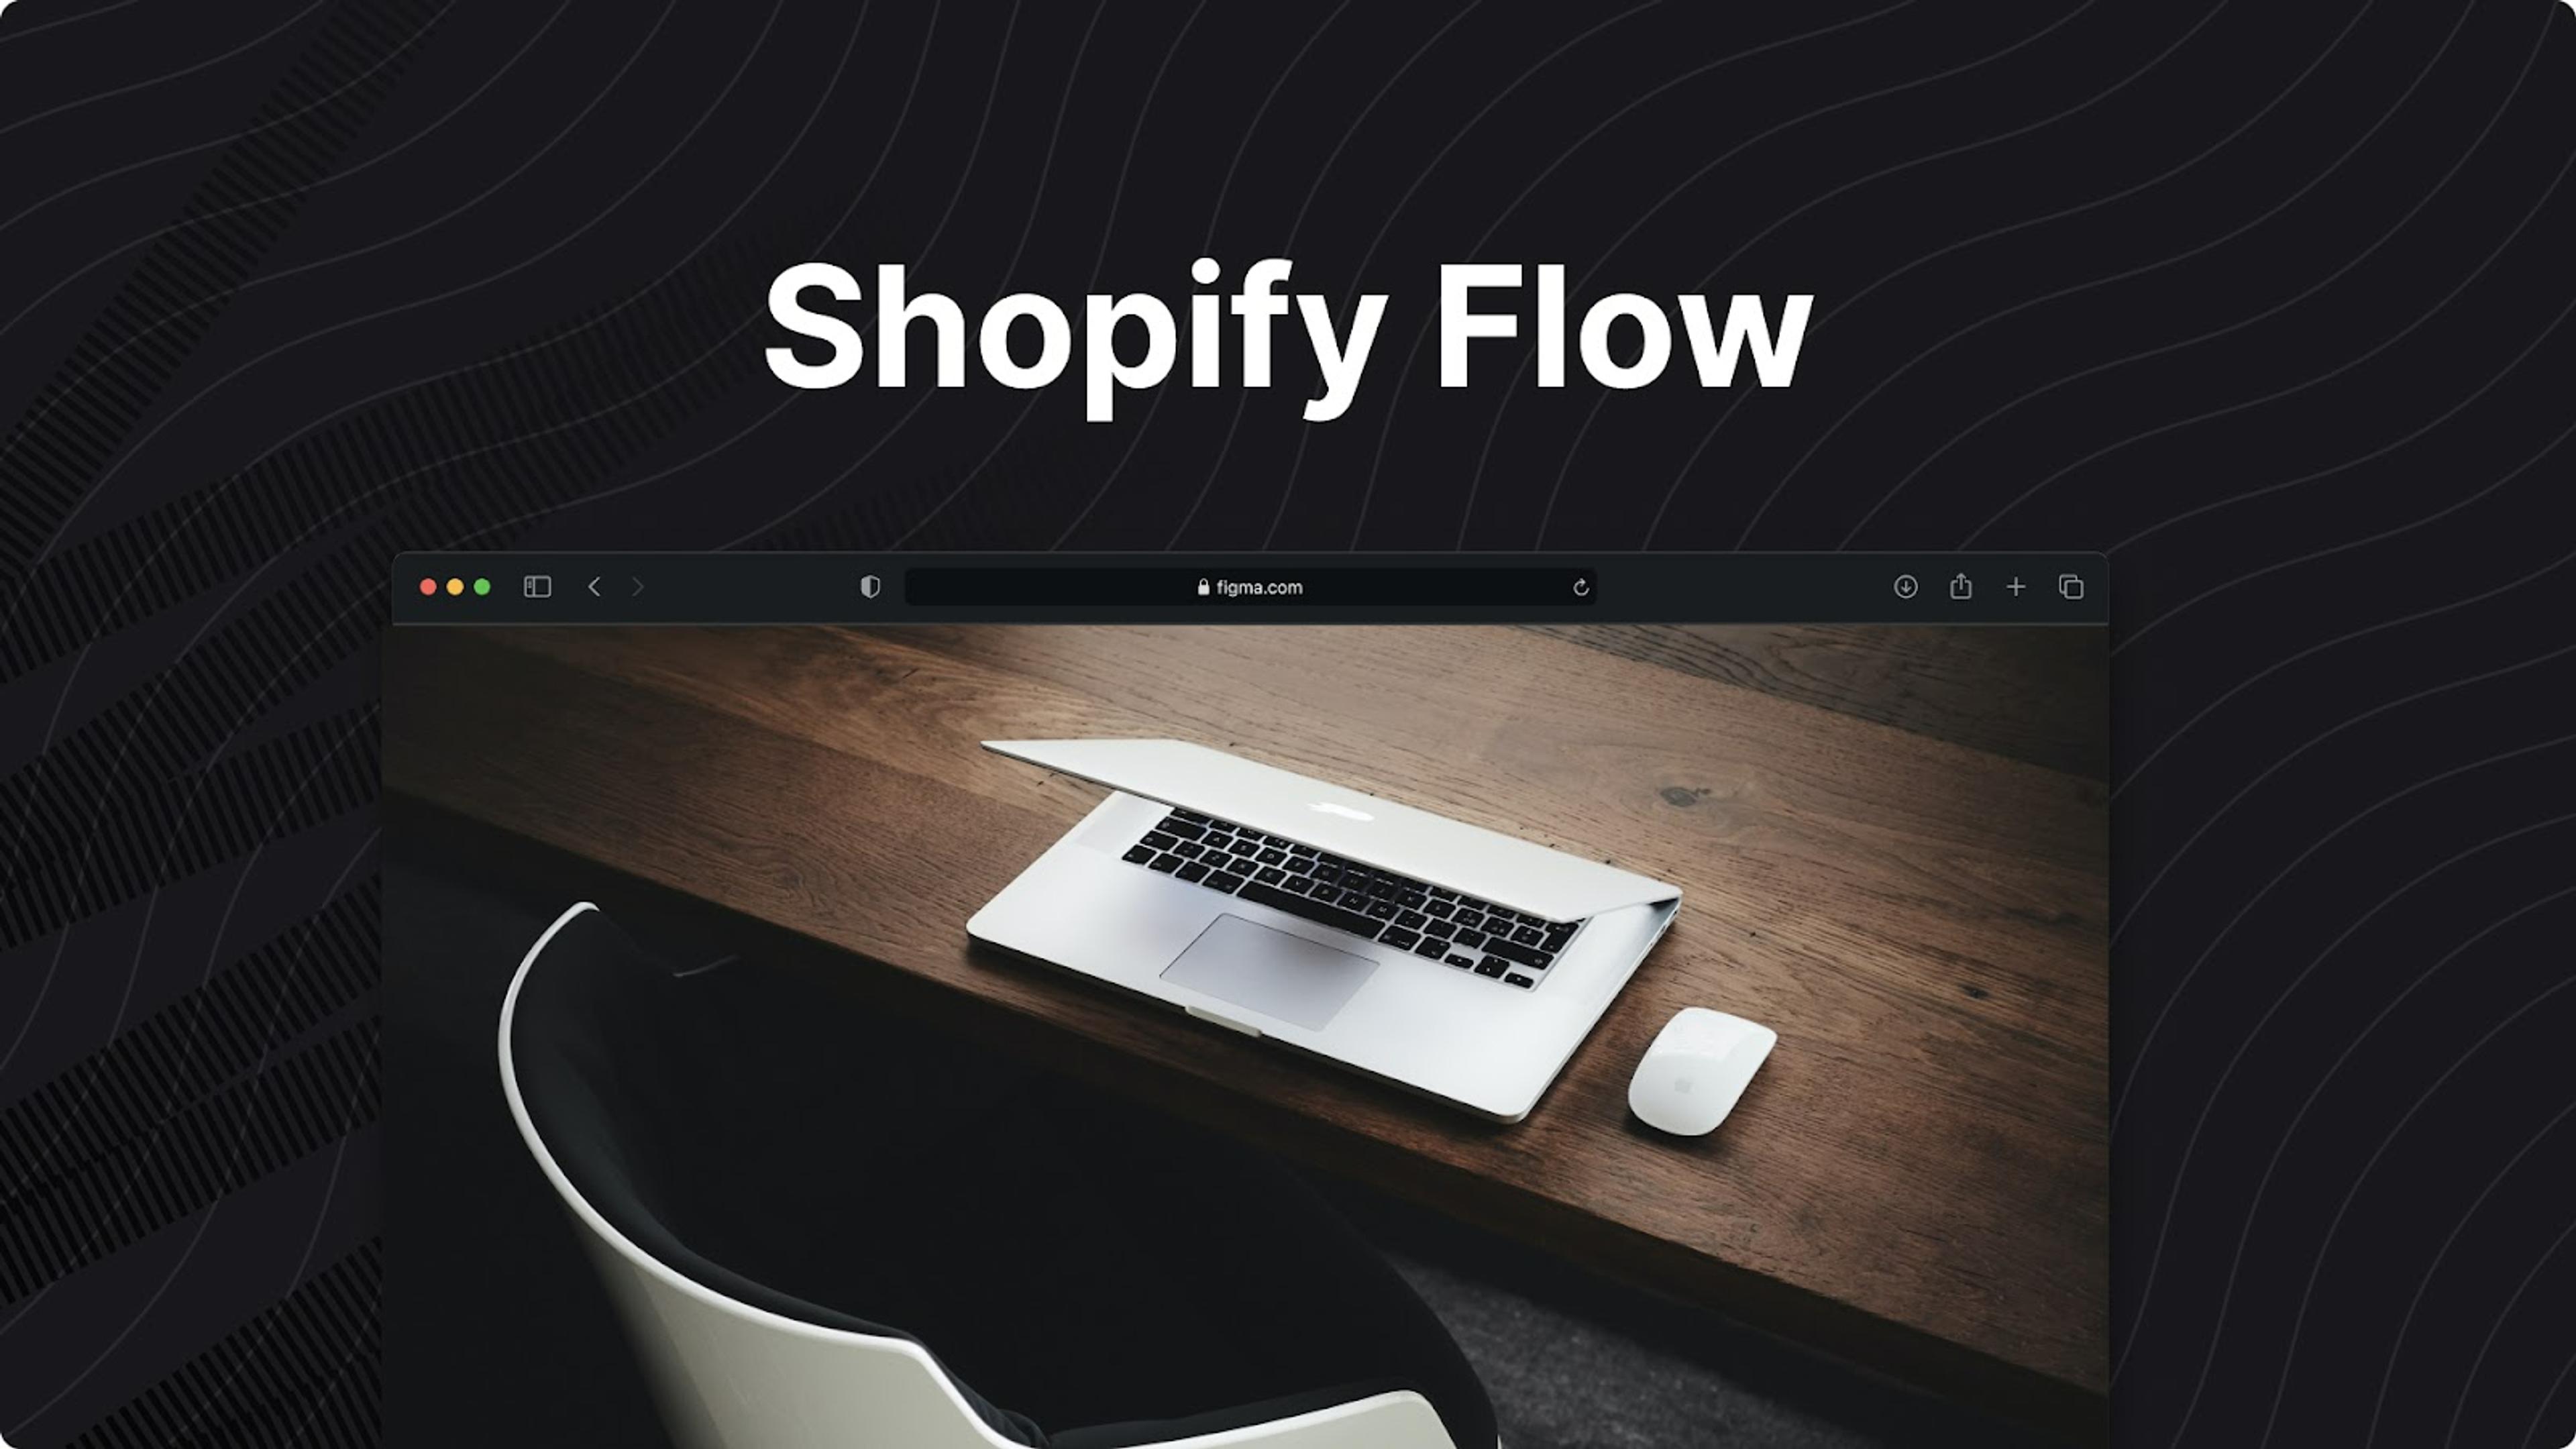 What is Shopify Flow?